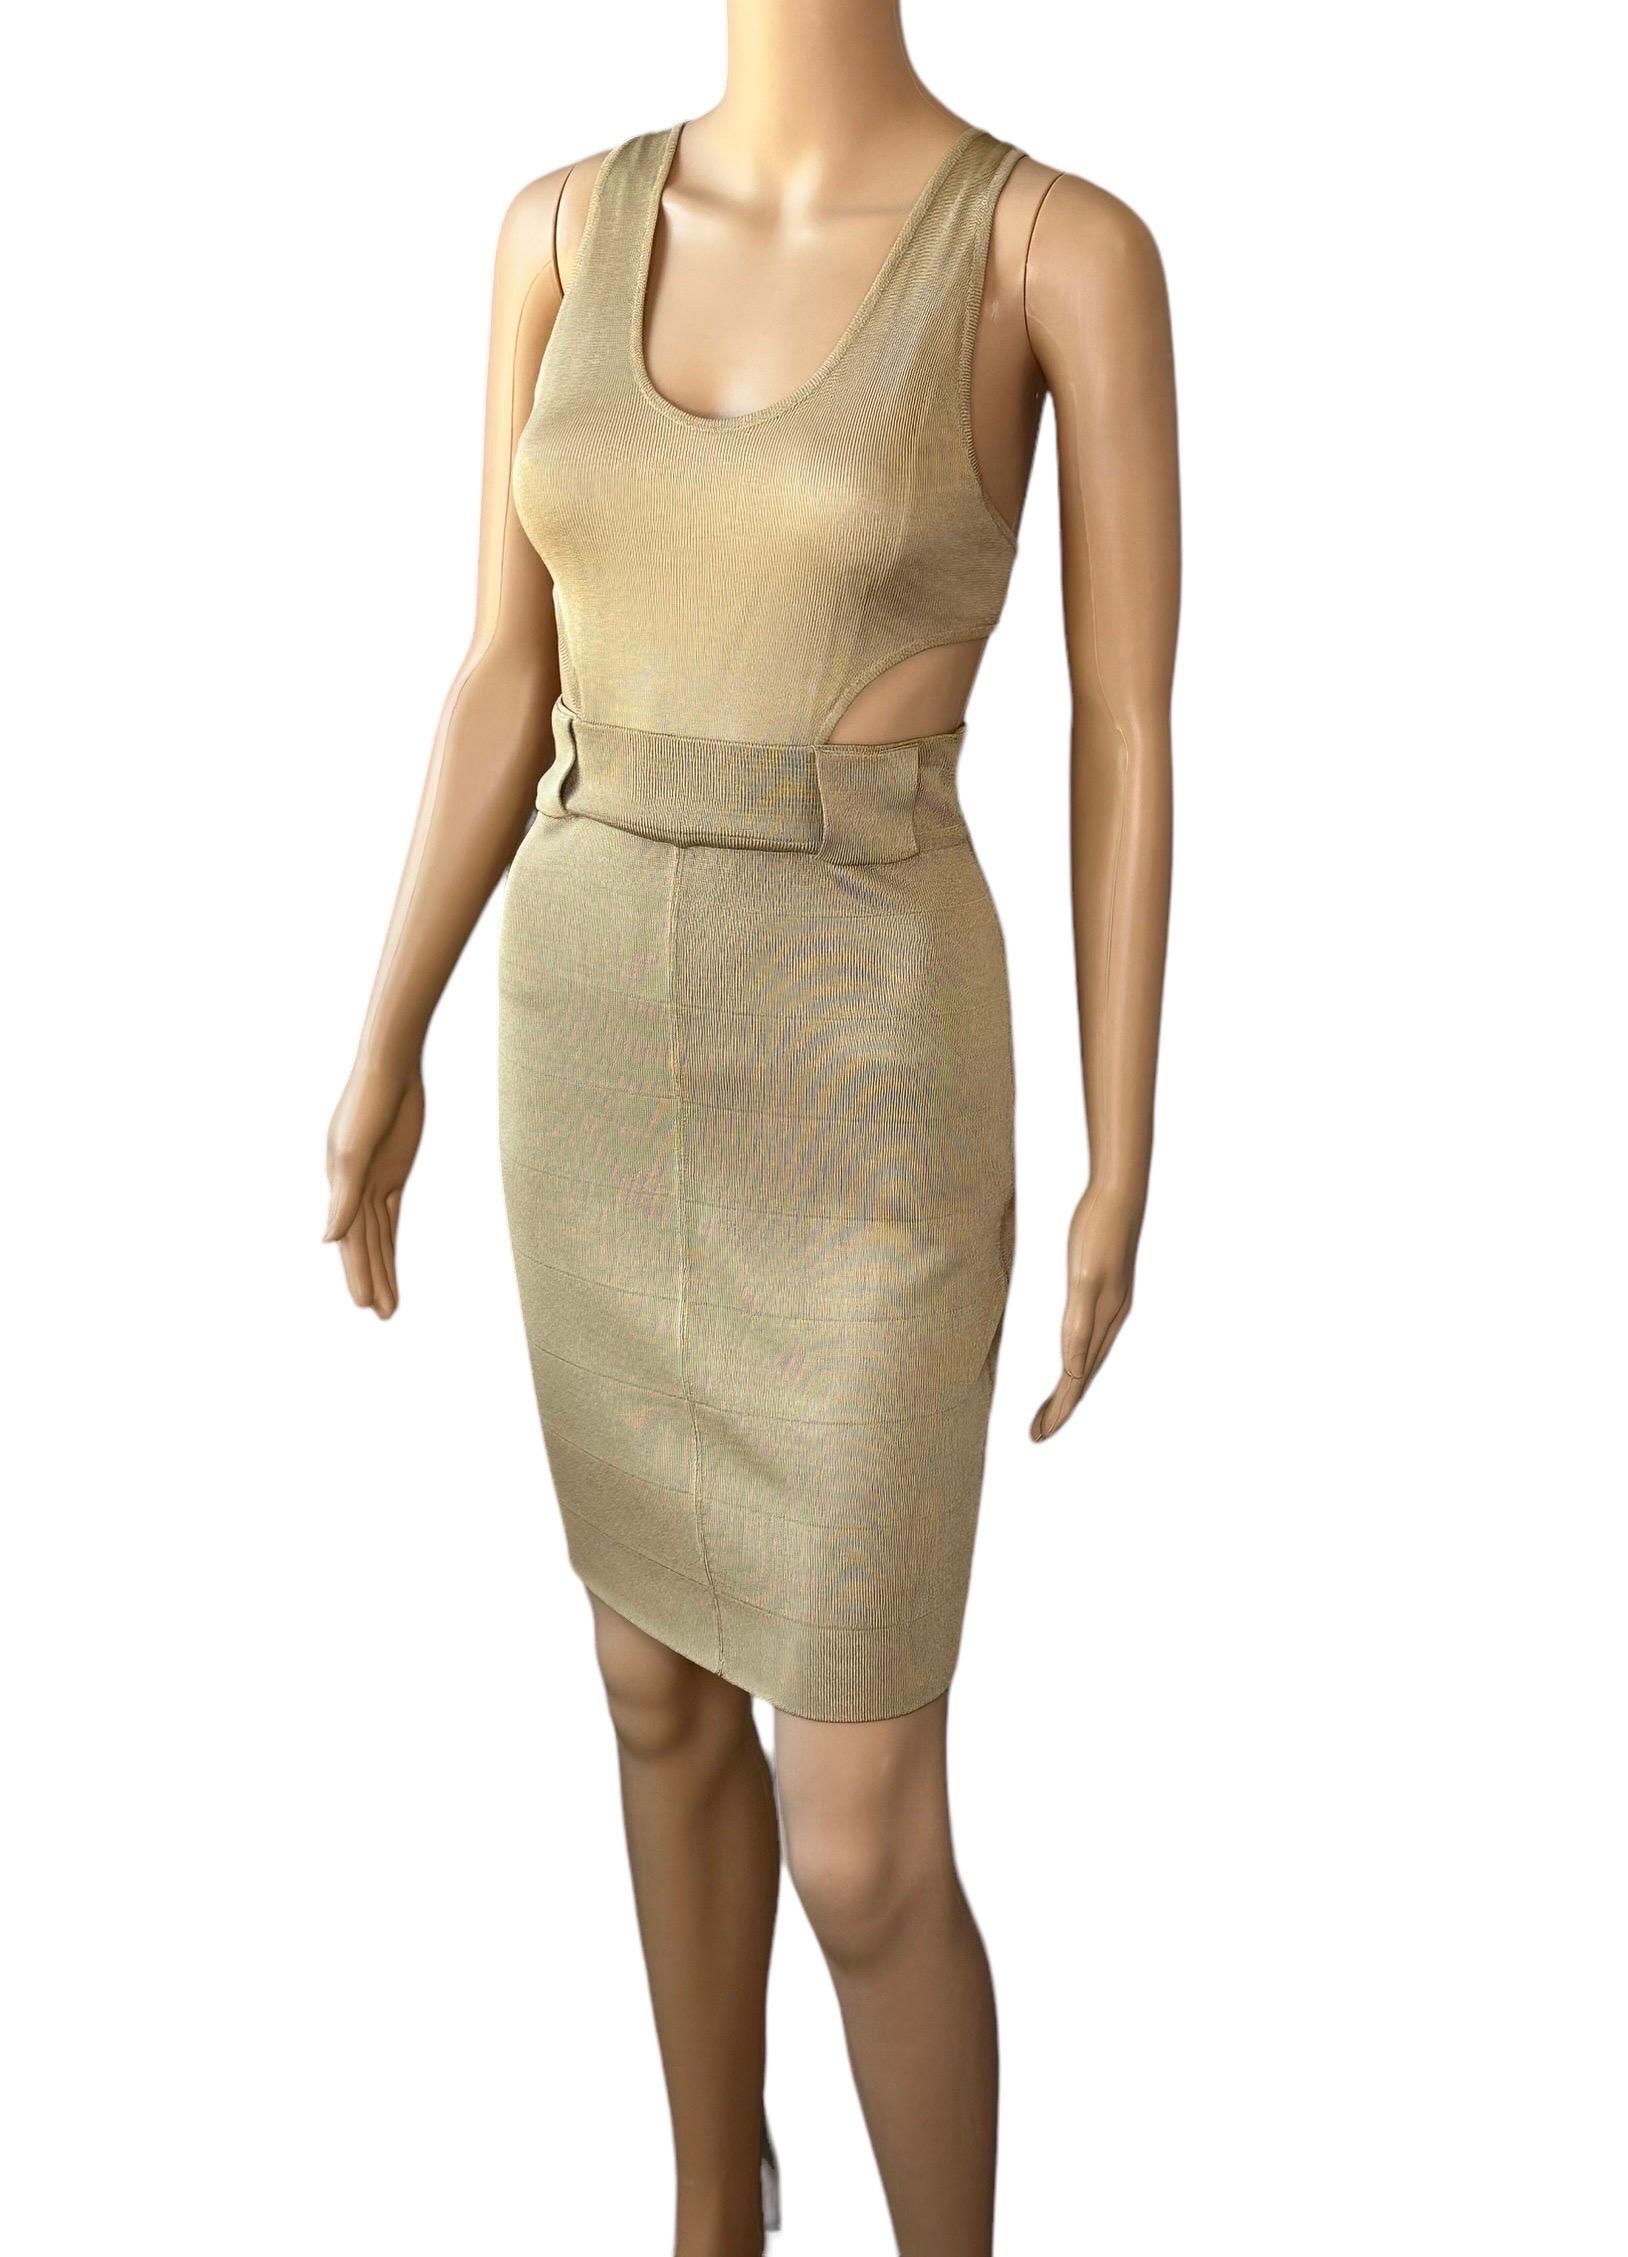 Azzedine Alaia S/S 1985 Vintage Plunged Cutout Bodycon Beige Mini Dress Size S

Condition: Very good vintage condition